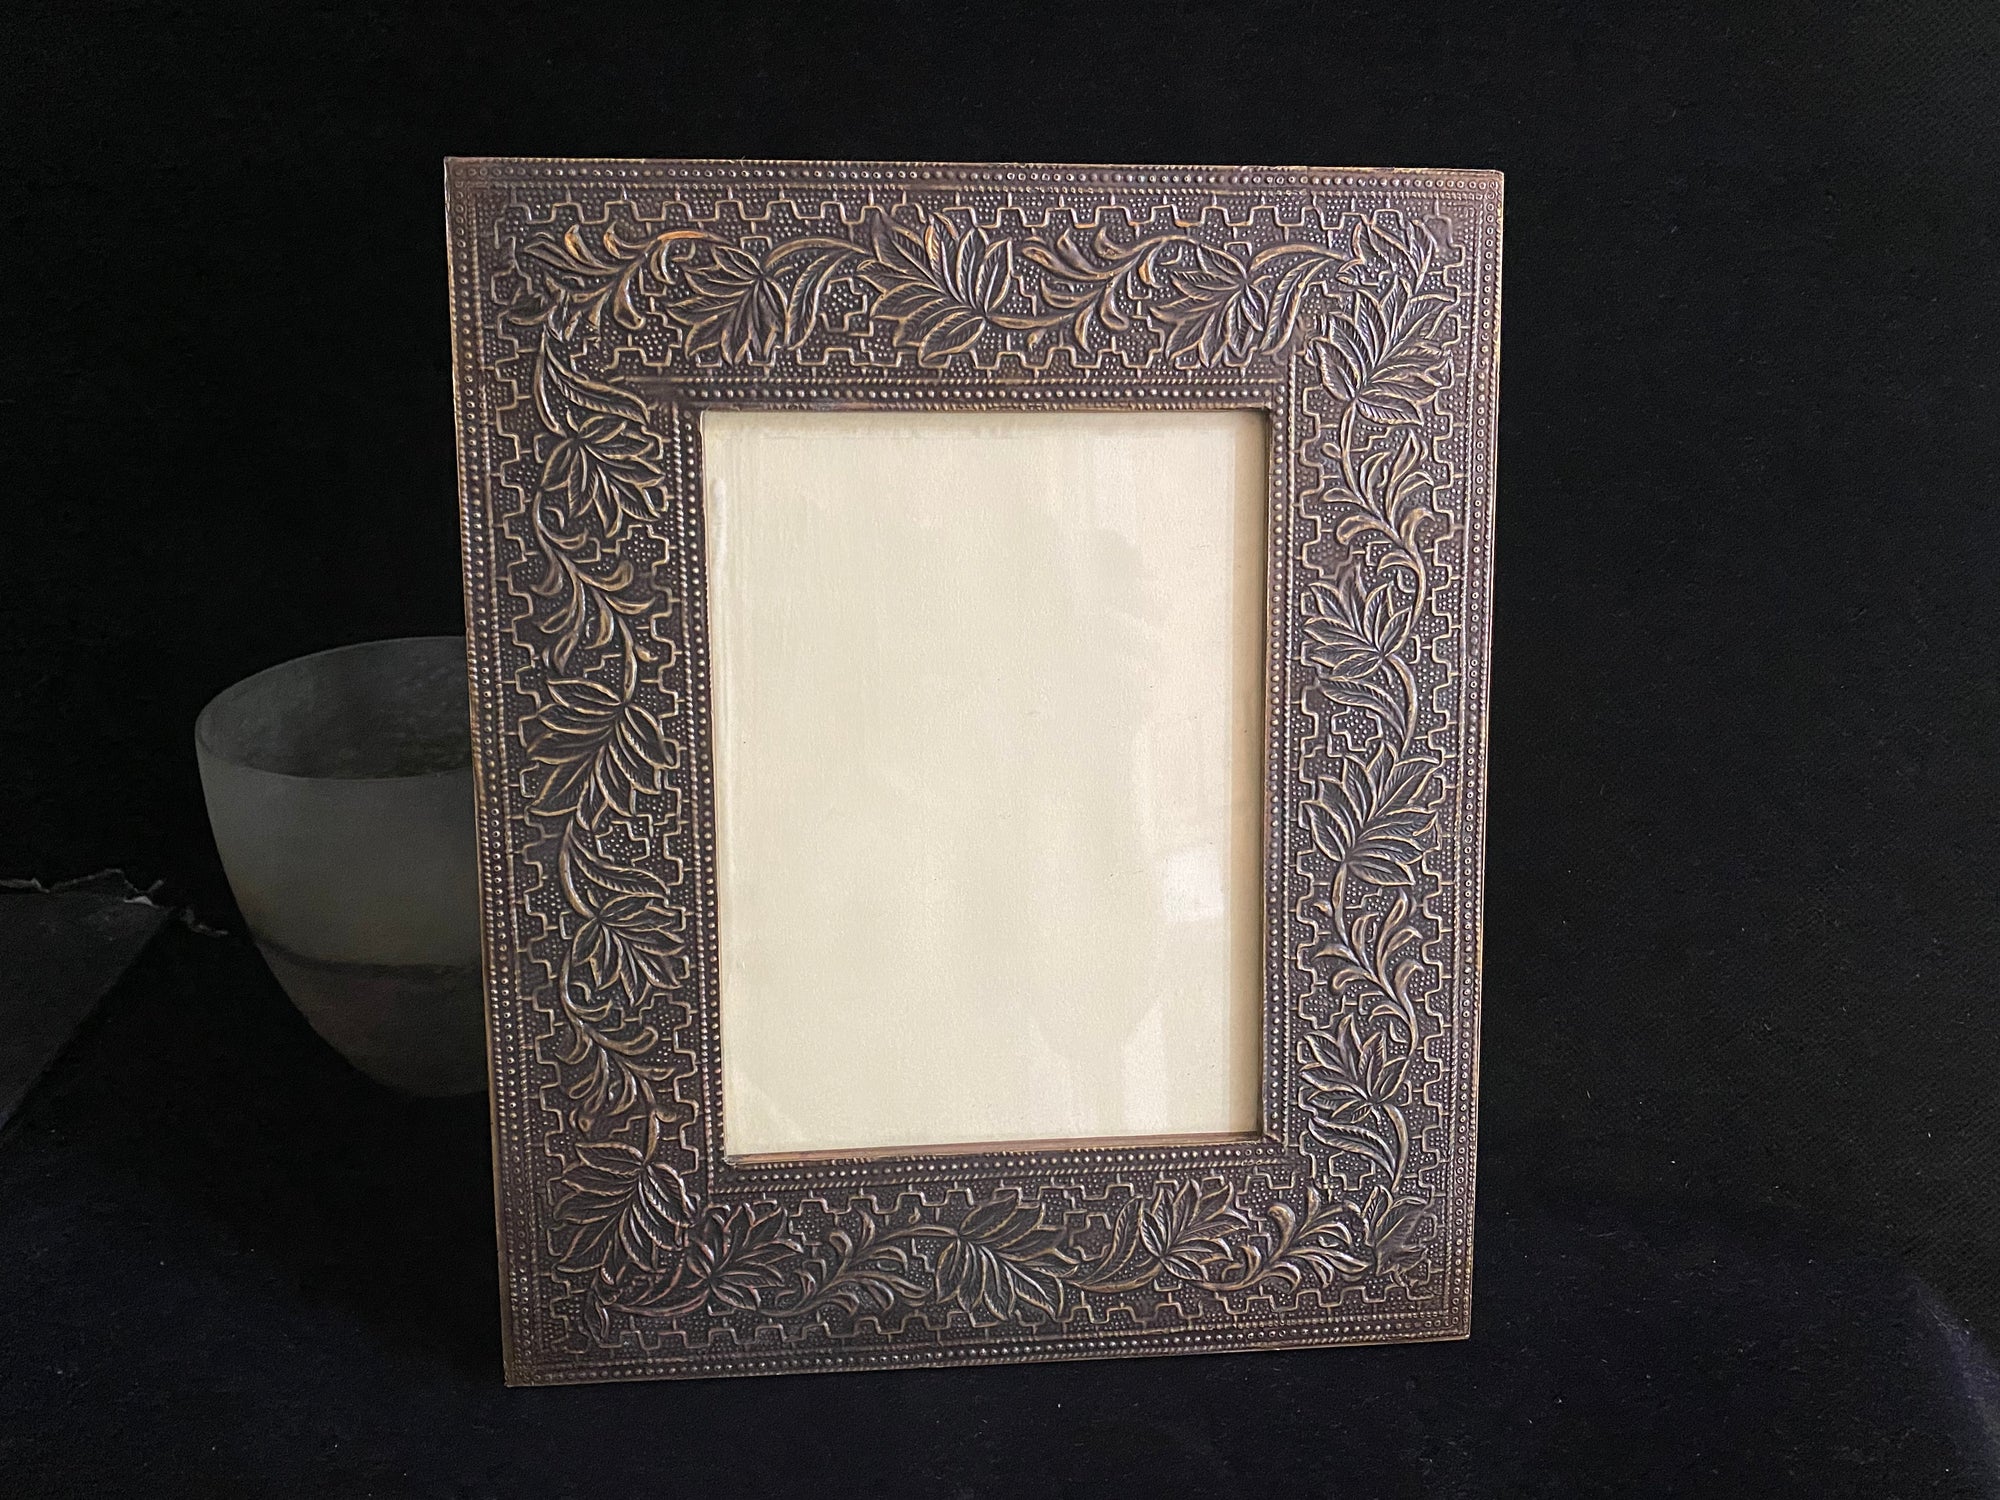 Photo frame features patterned brass over a hardwood frame